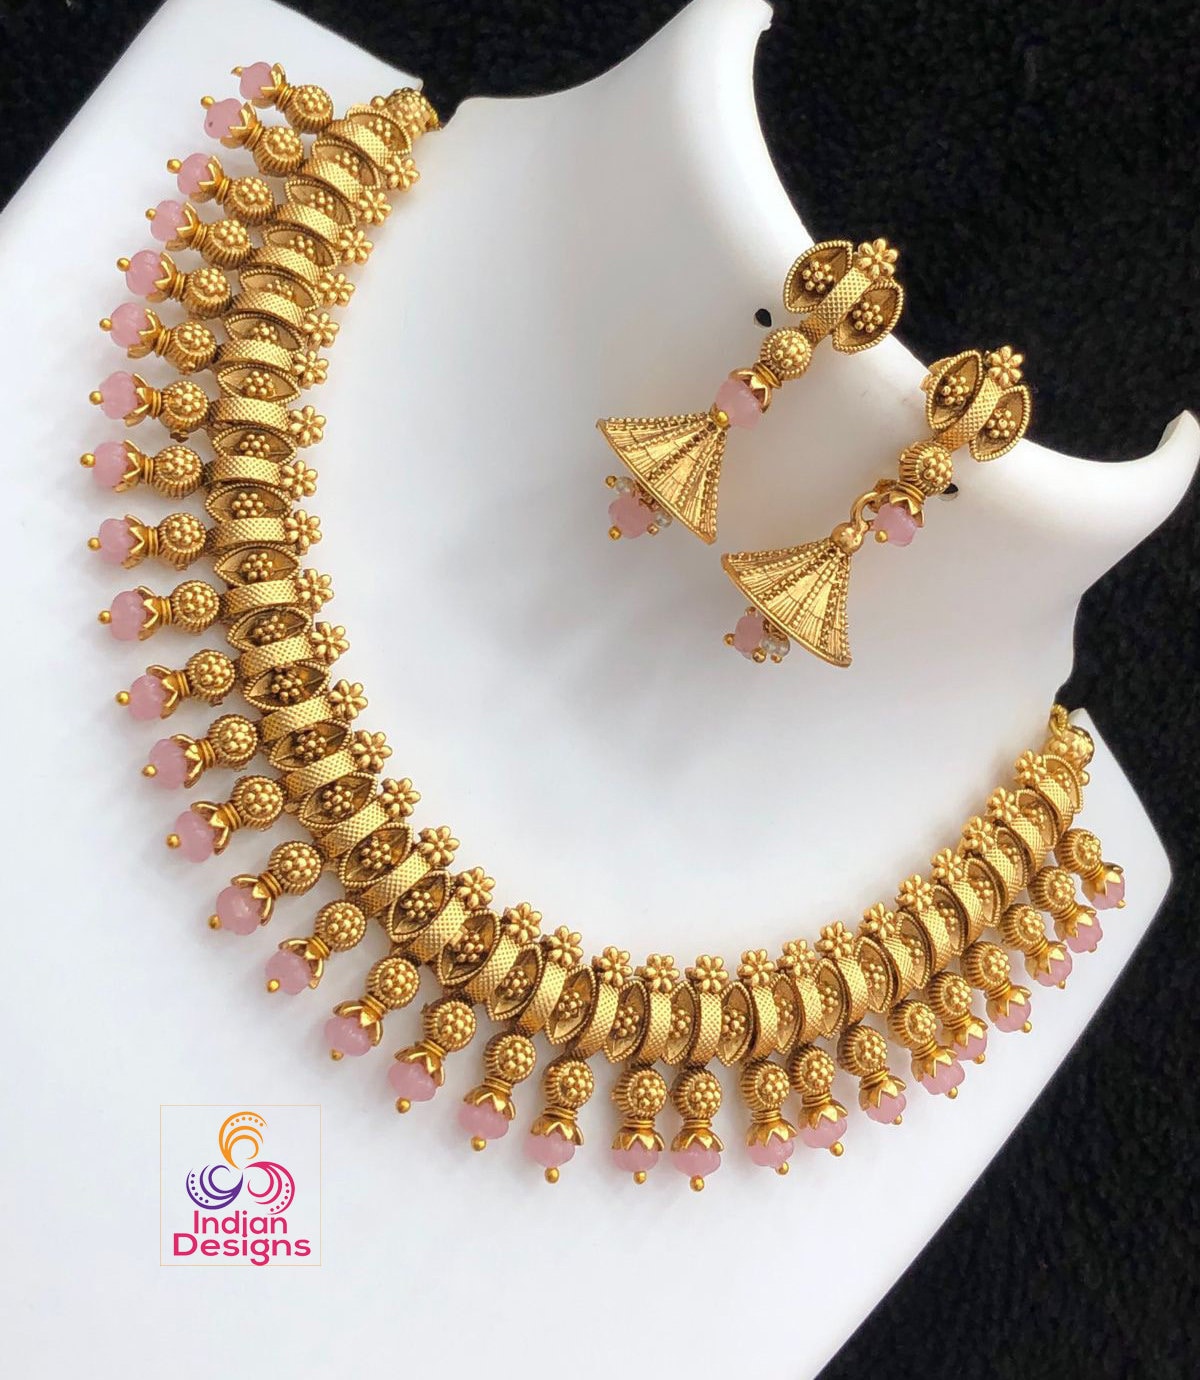 NL10594 AD White Marquise Stones Flexible South Indian Handmade Gold Finish Jewellery  Set Shop Online | JewelSmart.in